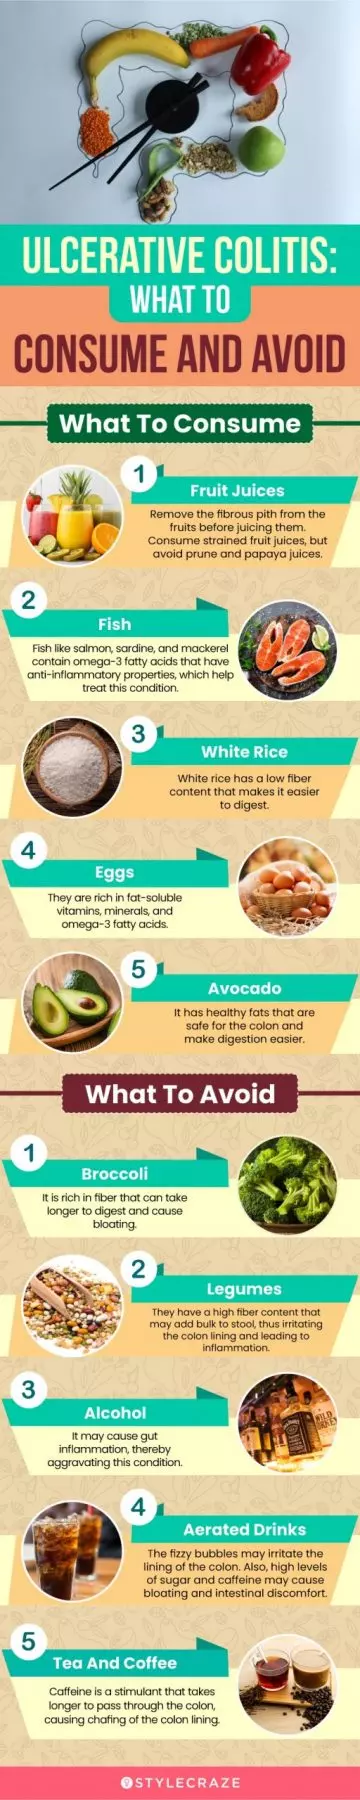 ulcerative colitis what to eat and avoid (infographic)